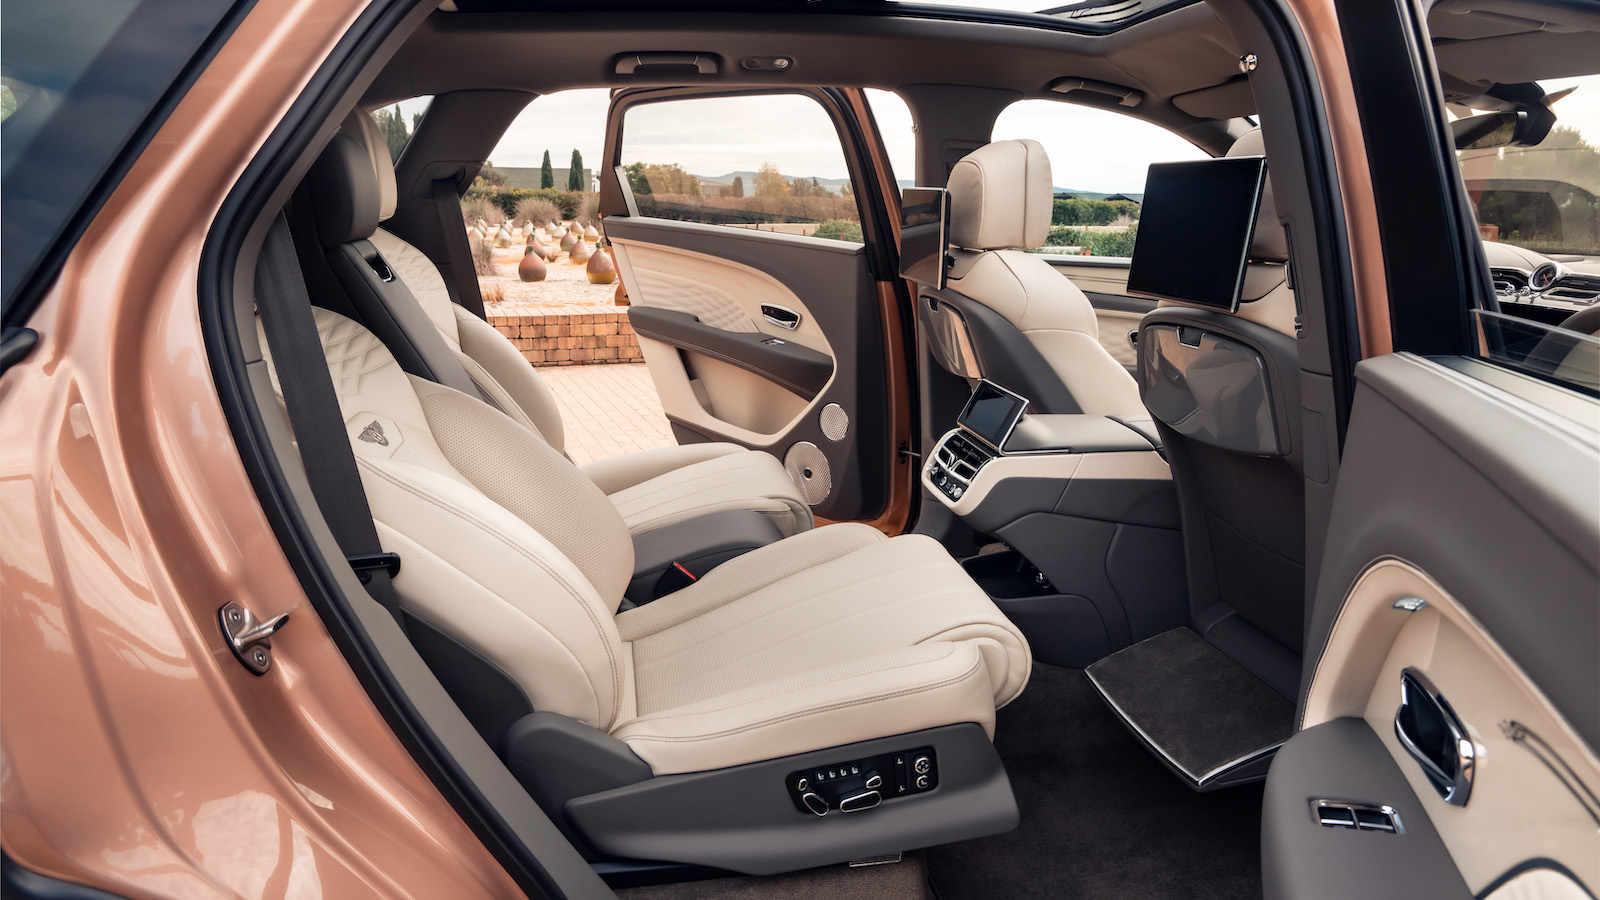 Bentley Brings First Class Airline Luxury To Cars With Newest Invention